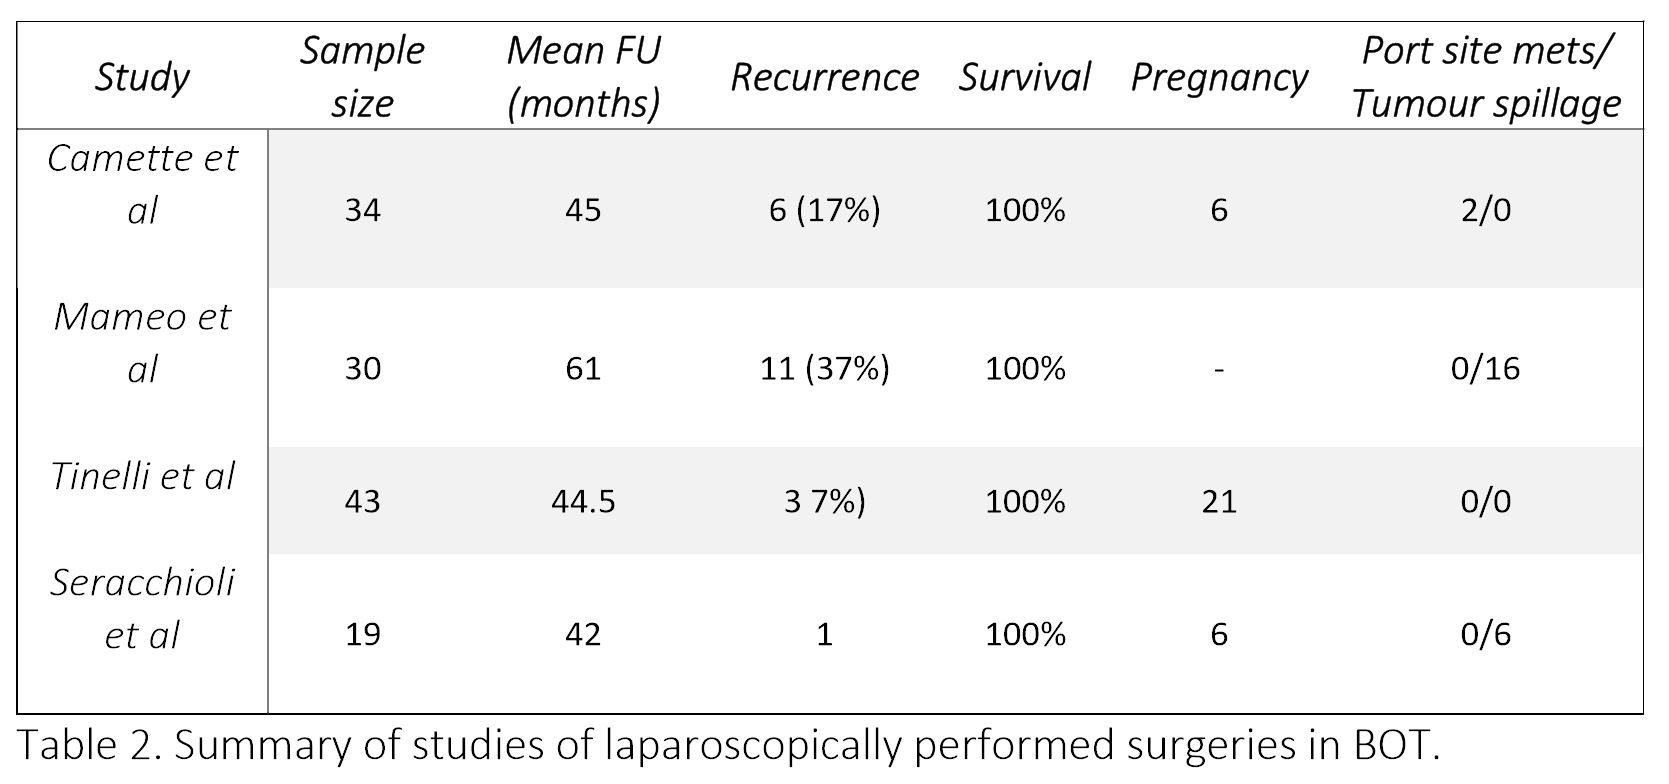 Summary of studies of laparoscopically performed surgeries in BOT